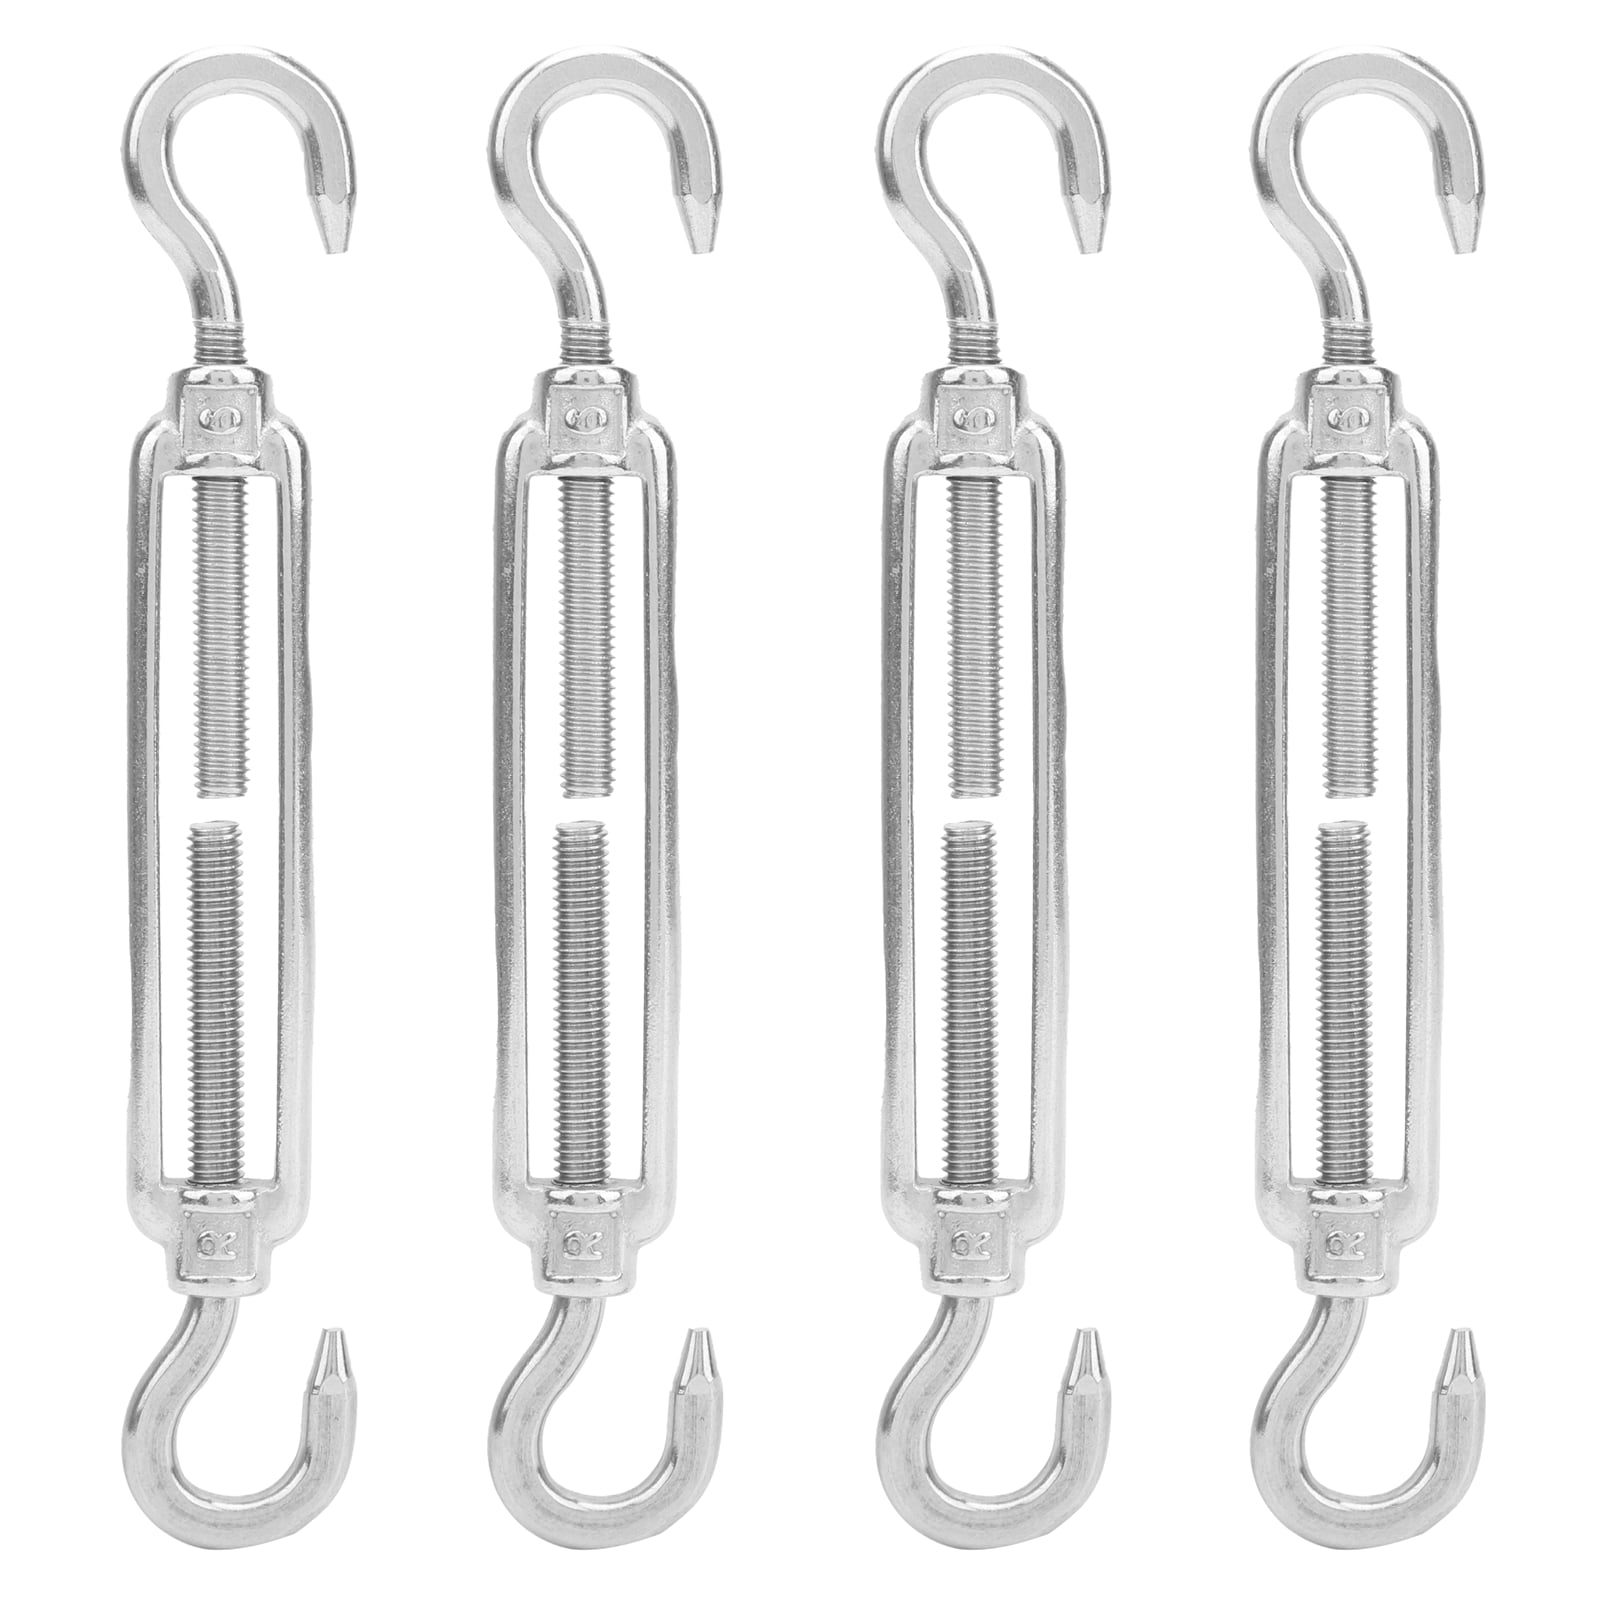 Hook Turnbuckle Wire Tensioner Steel Rope Tensioner Safety Bearing Capacity 100kg for Outdoor 10pcs 304 Strainer Stainless Hook